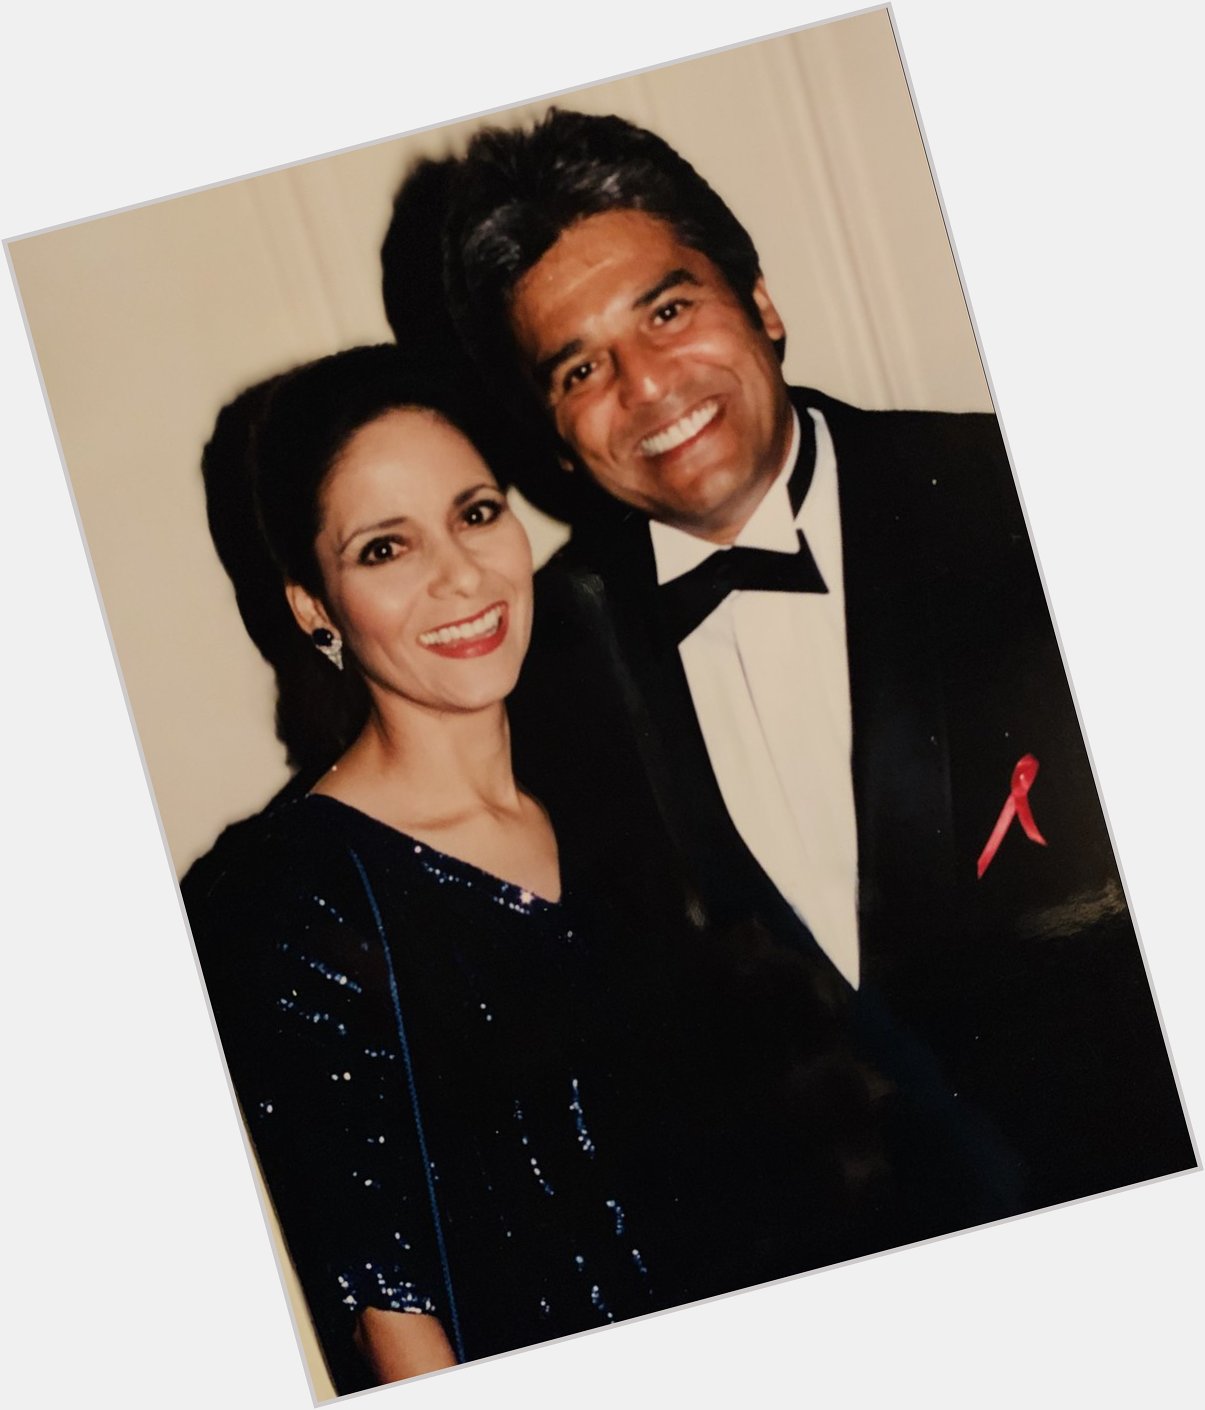 Happy belated birthday talented star Erik Estrada! Thank you for your contributions to the arts friend! Godspeed! 